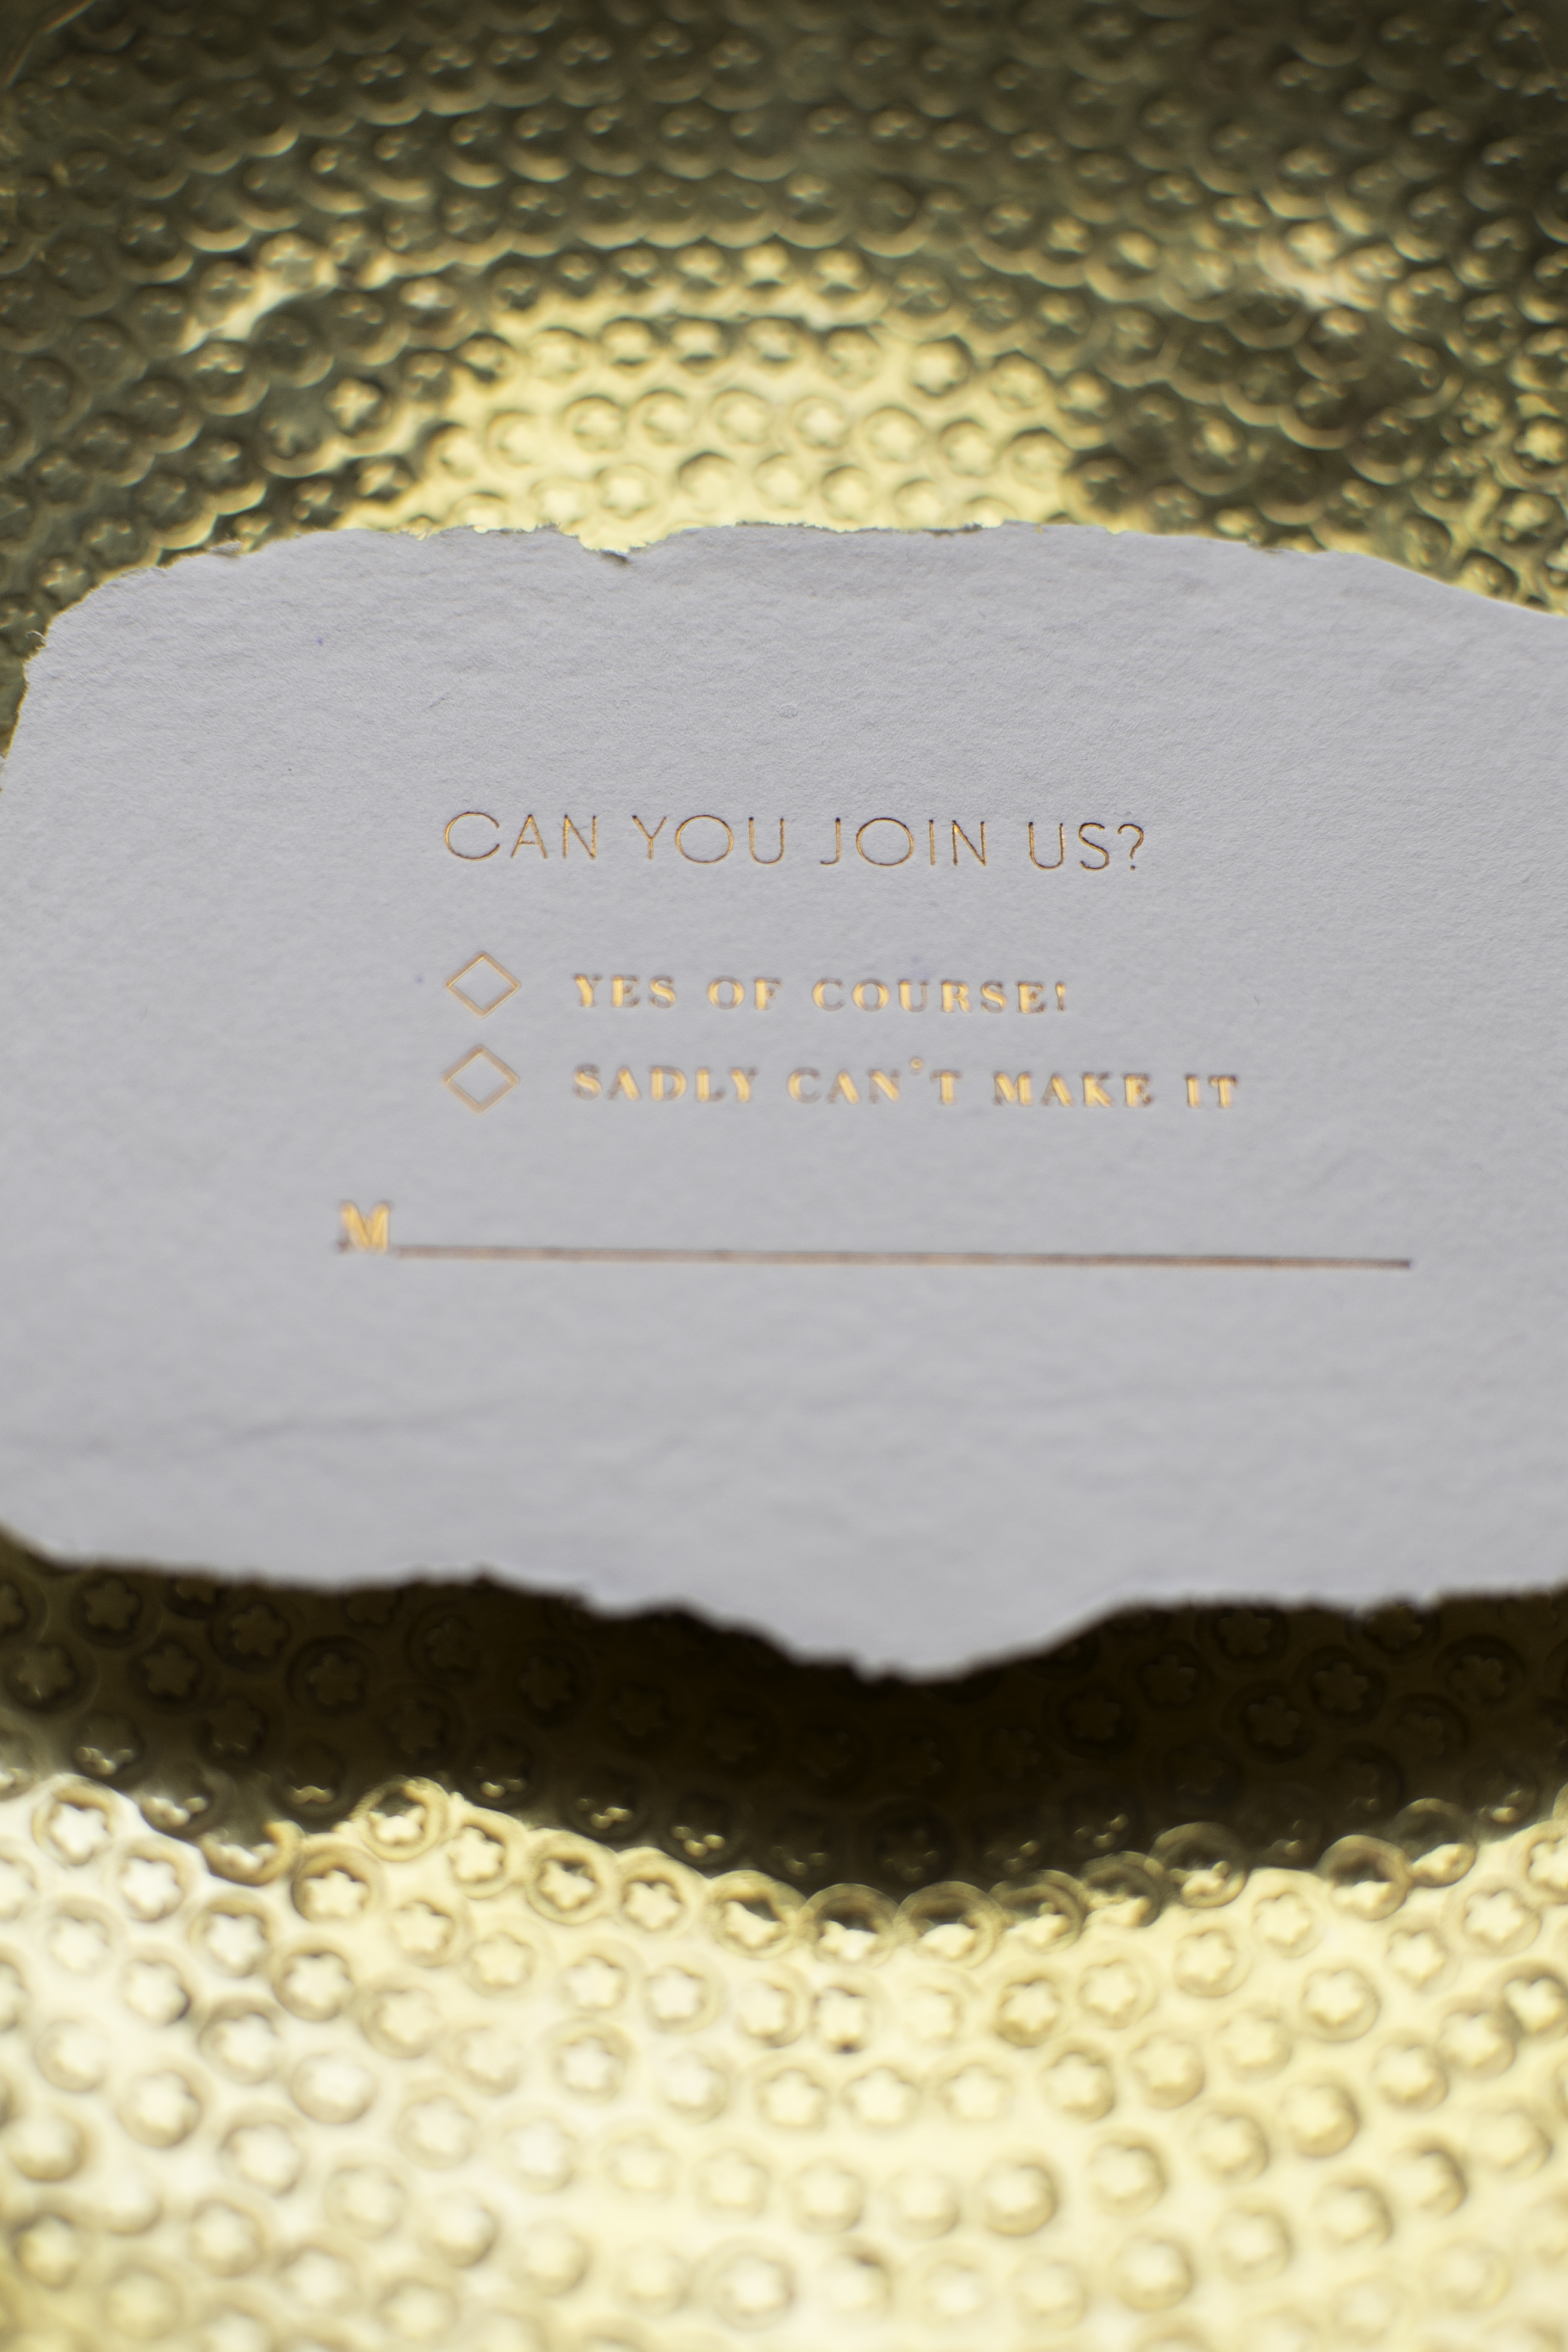 Copper Foil Wedding Invitations on Handmade Paper by Al Stampa